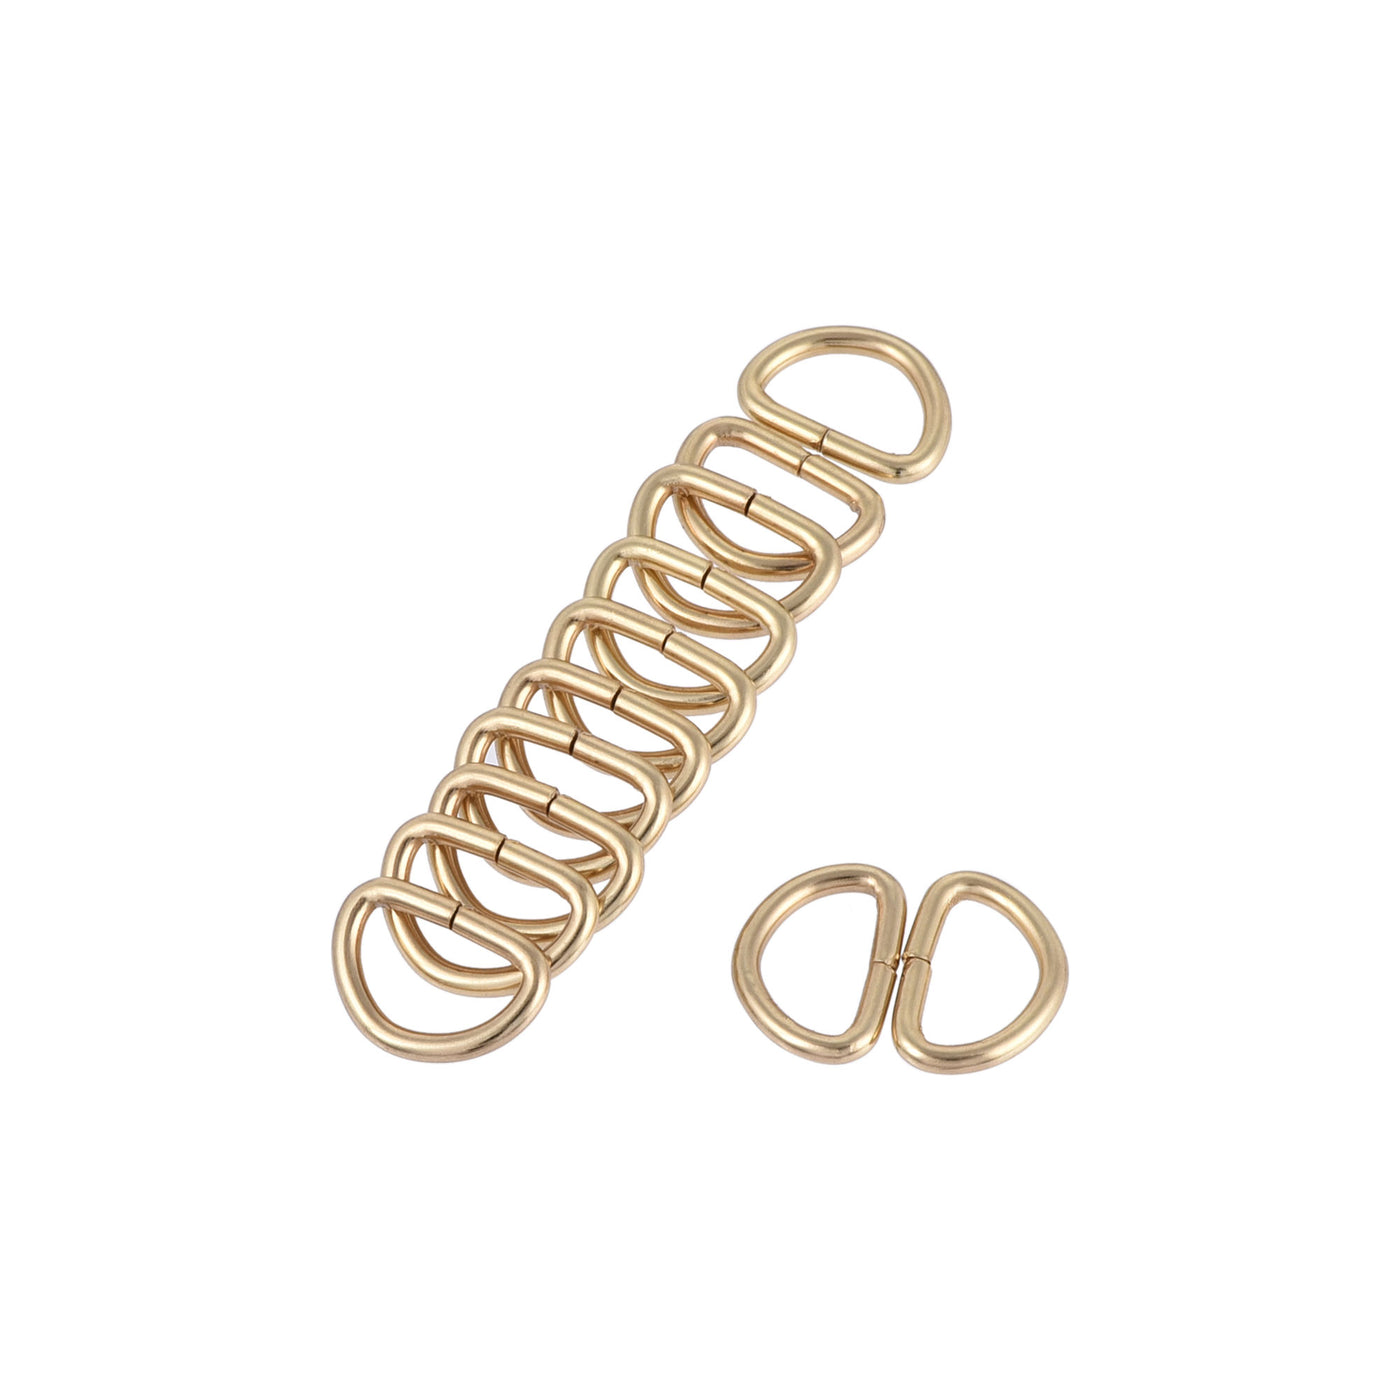 uxcell Uxcell Metal D Ring 0.39"(10mm) D-Rings Buckle for Hardware Bags Belts Craft DIY Accessories Gold Tone 150pcs